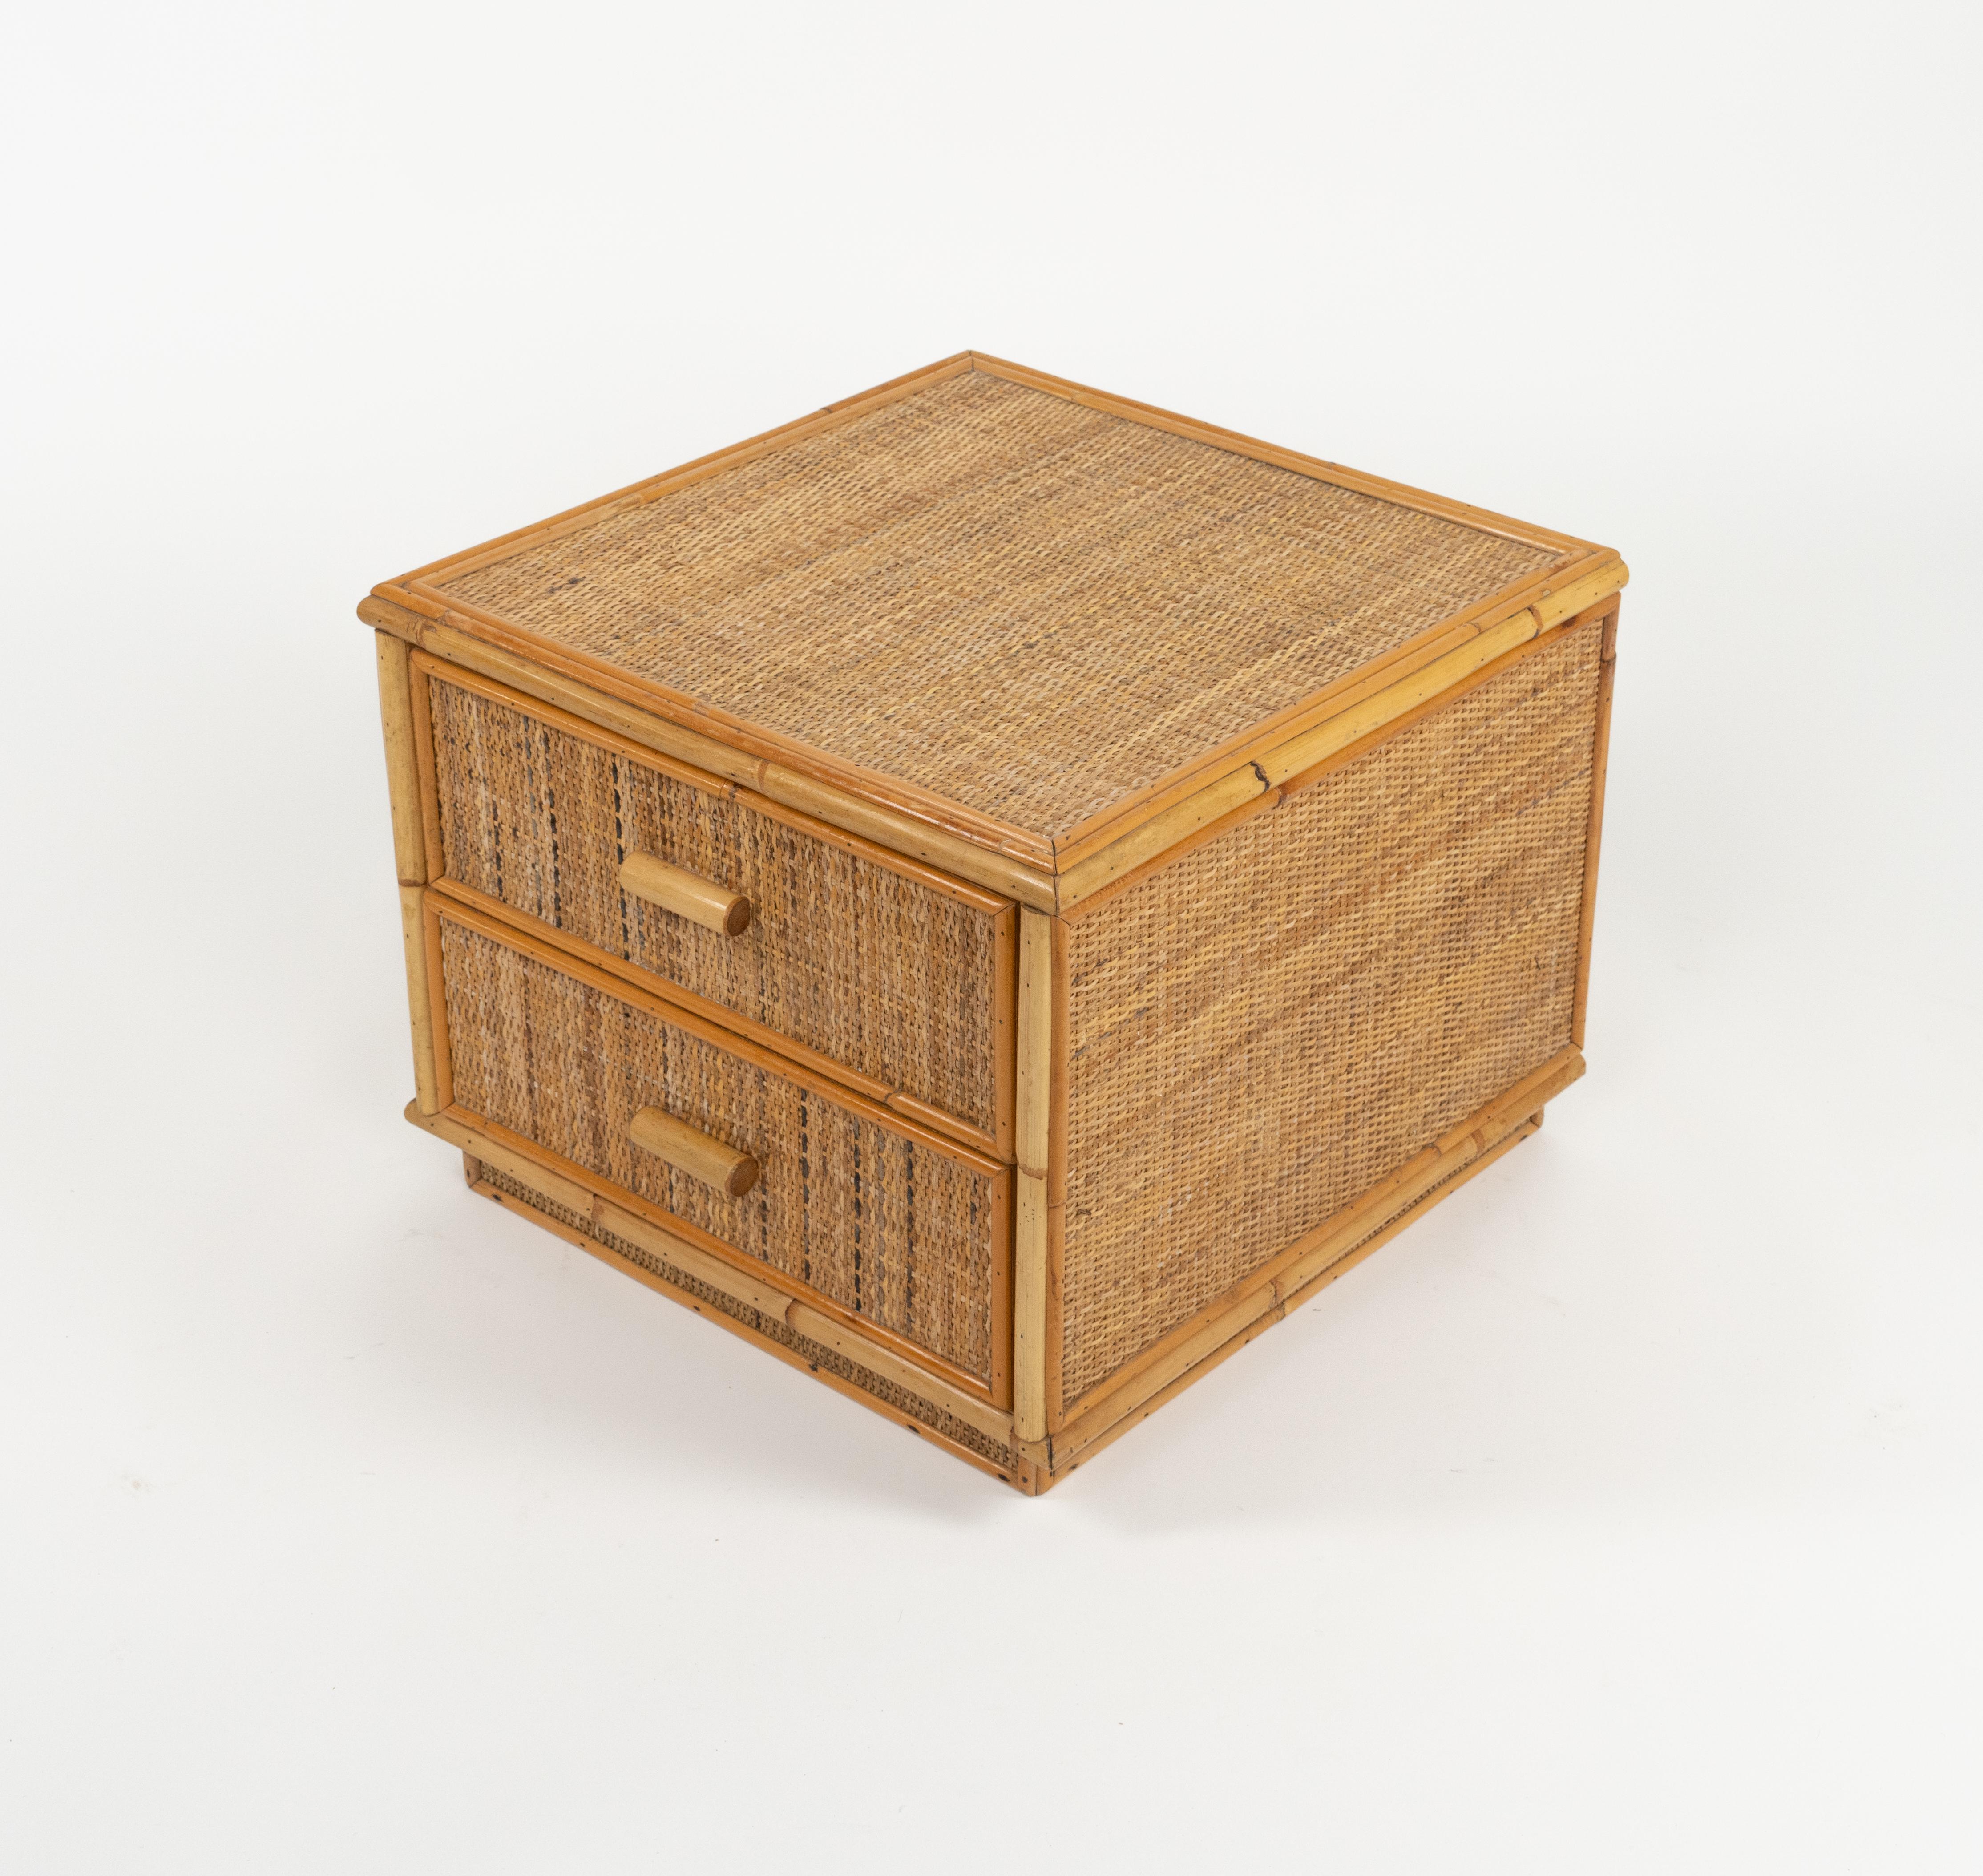 Bamboo and Rattan Pair of Bedside Tables Nightstands Dal Vera Style, Italy 1970s For Sale 9